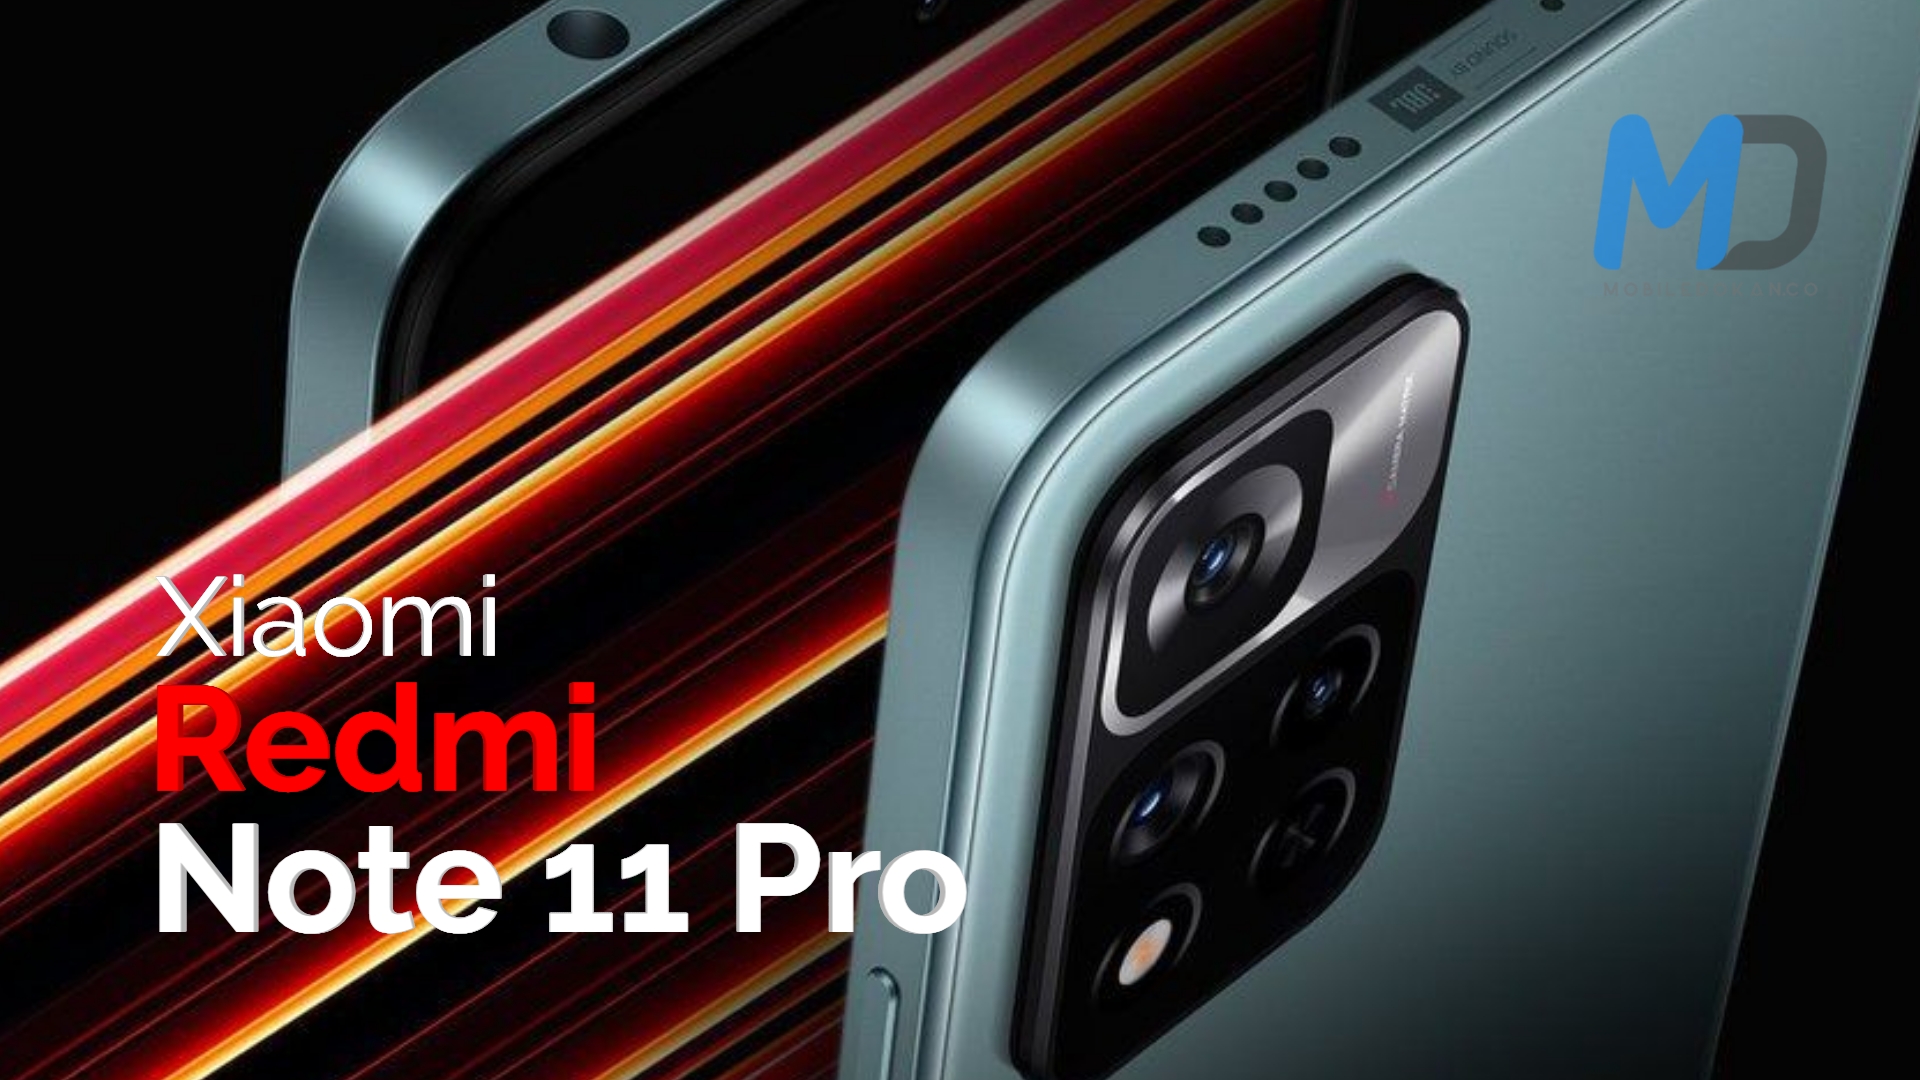 Redmi Note 11 Pro leaked specifications, coming with 108MP Quad camera